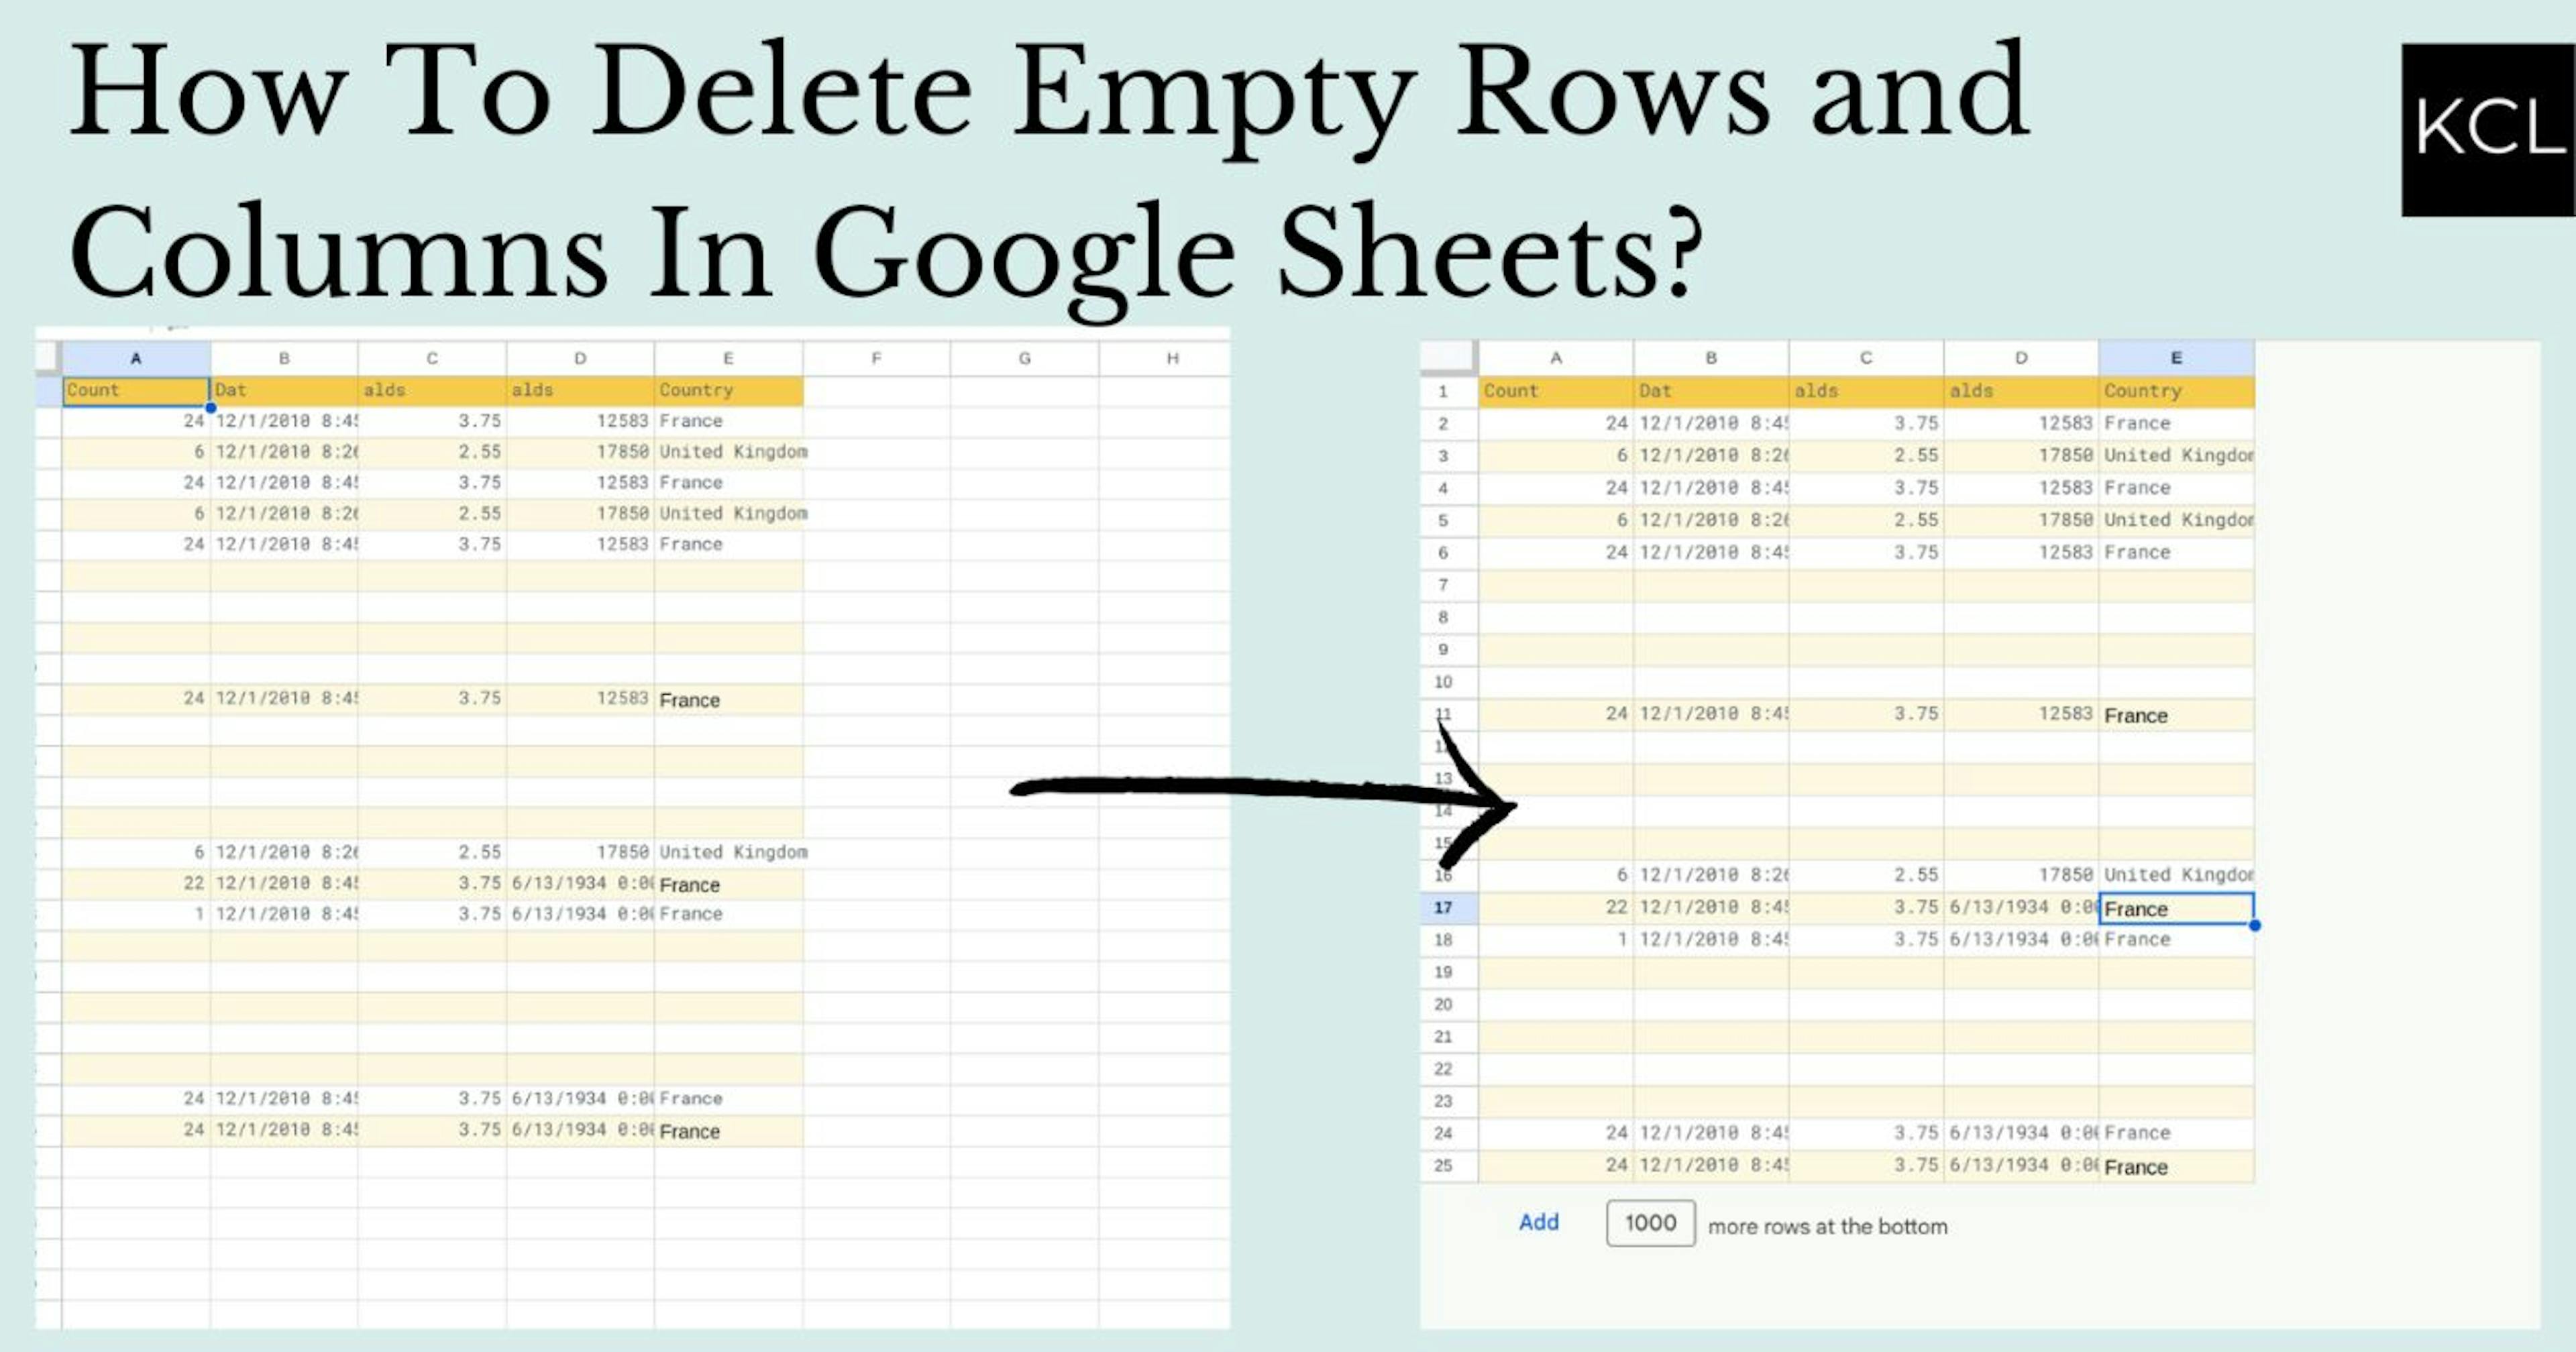 featured image - How to Delete Empty Rows and Columns in Google Sheets